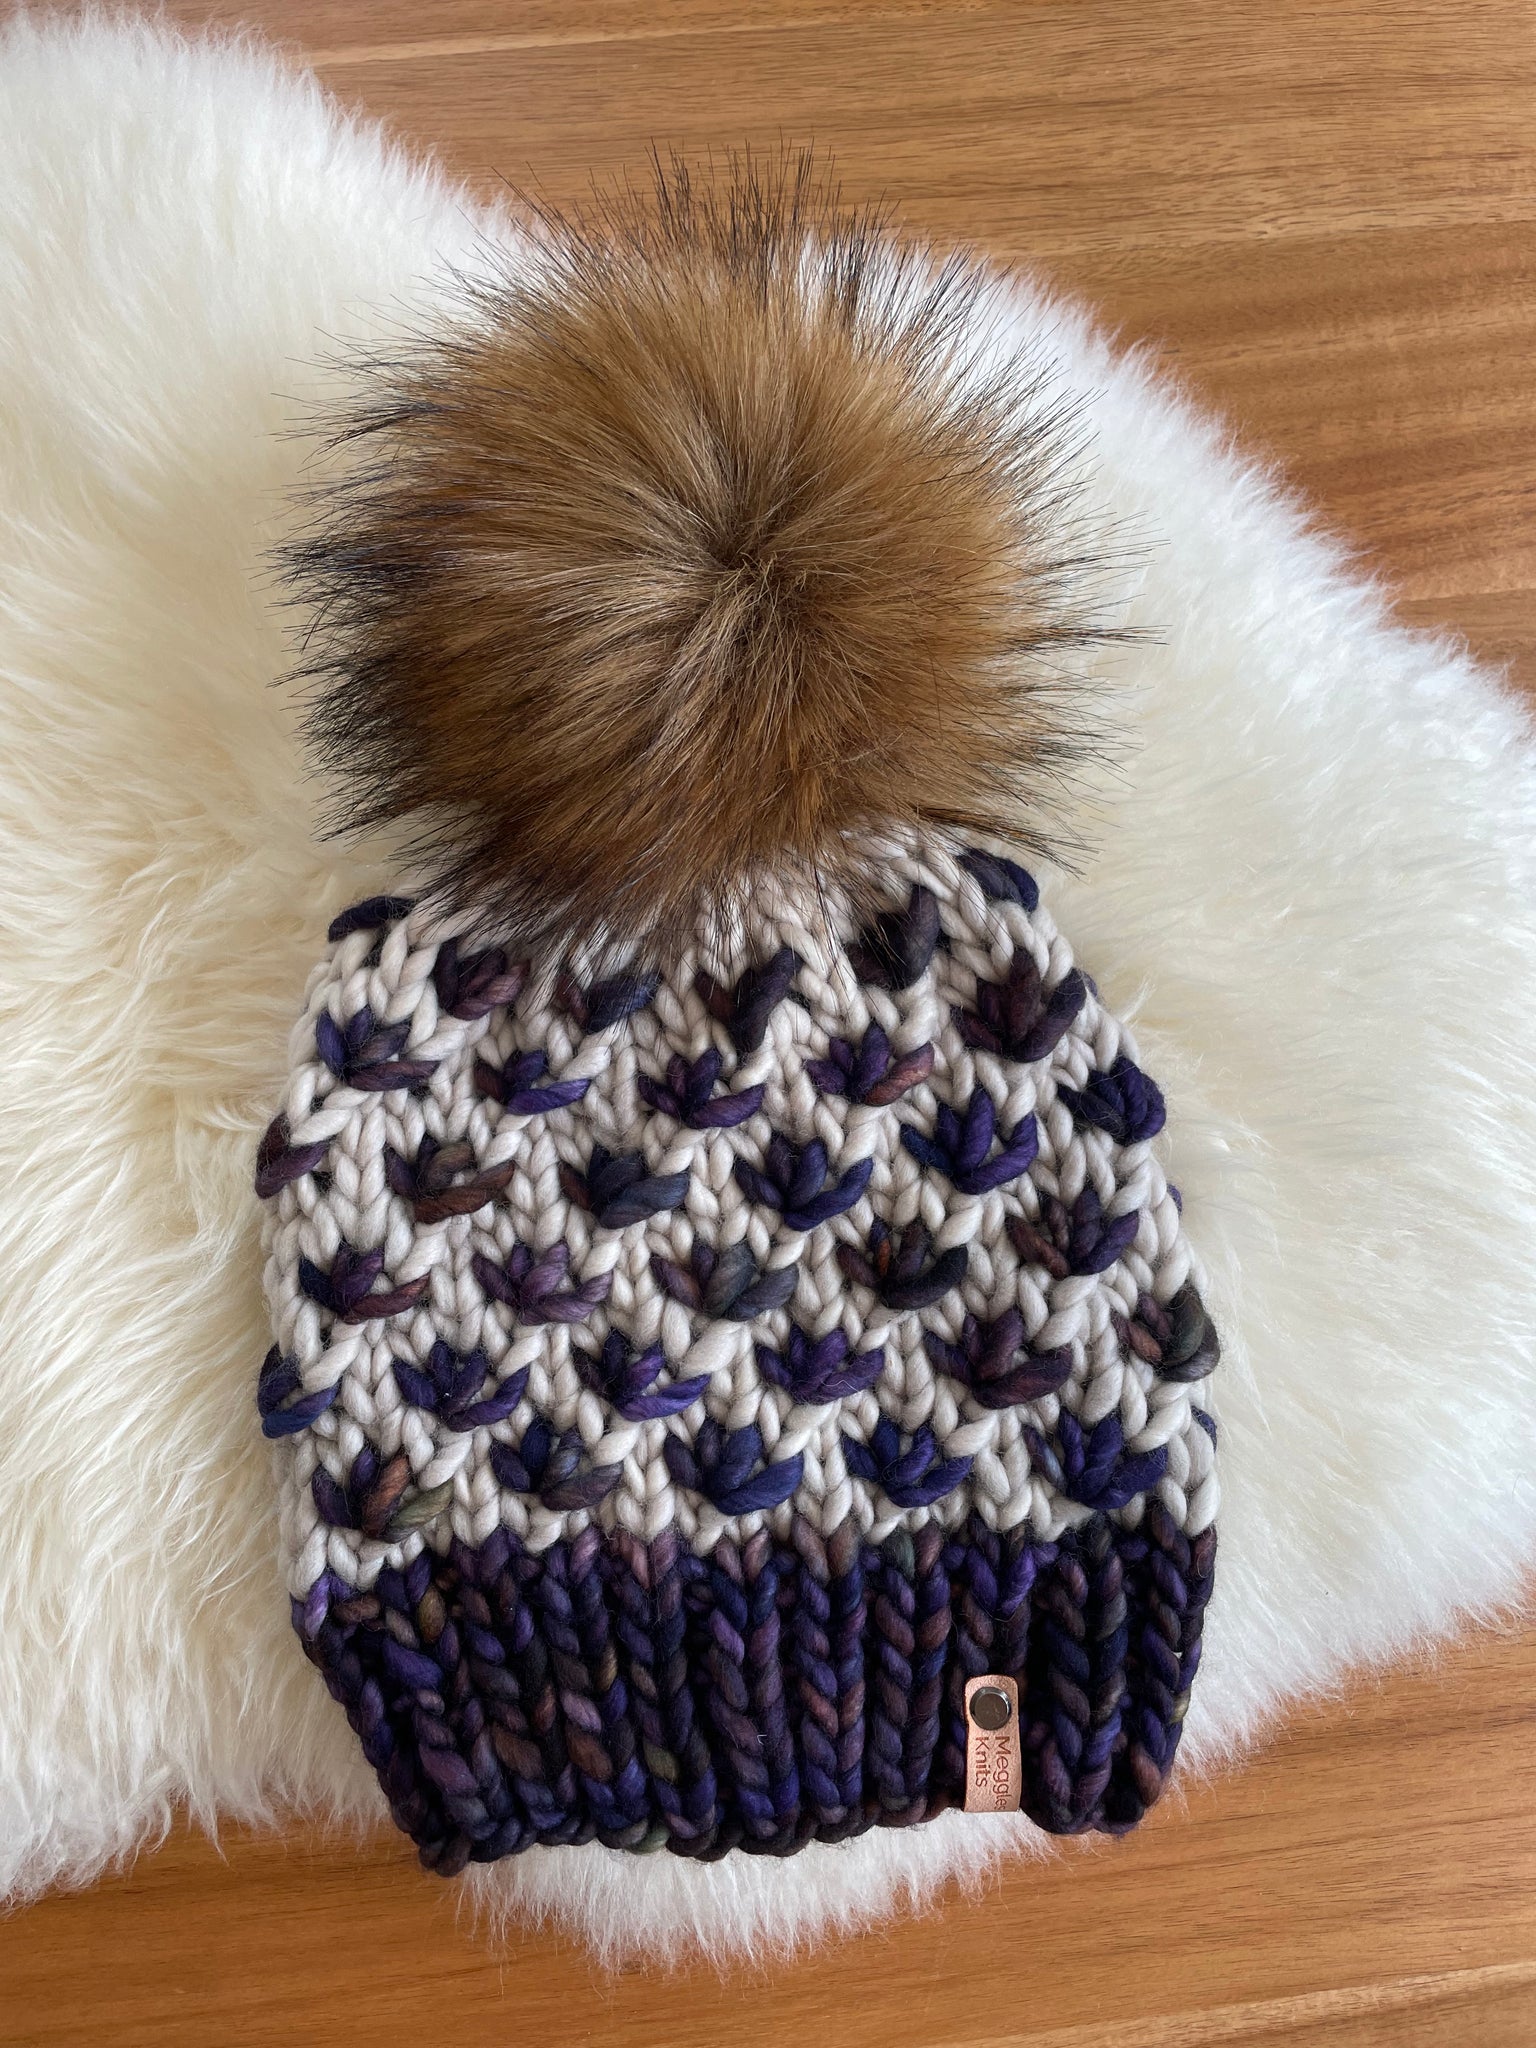 Luxury Lotus Flower Beanie in Fog and Soriano